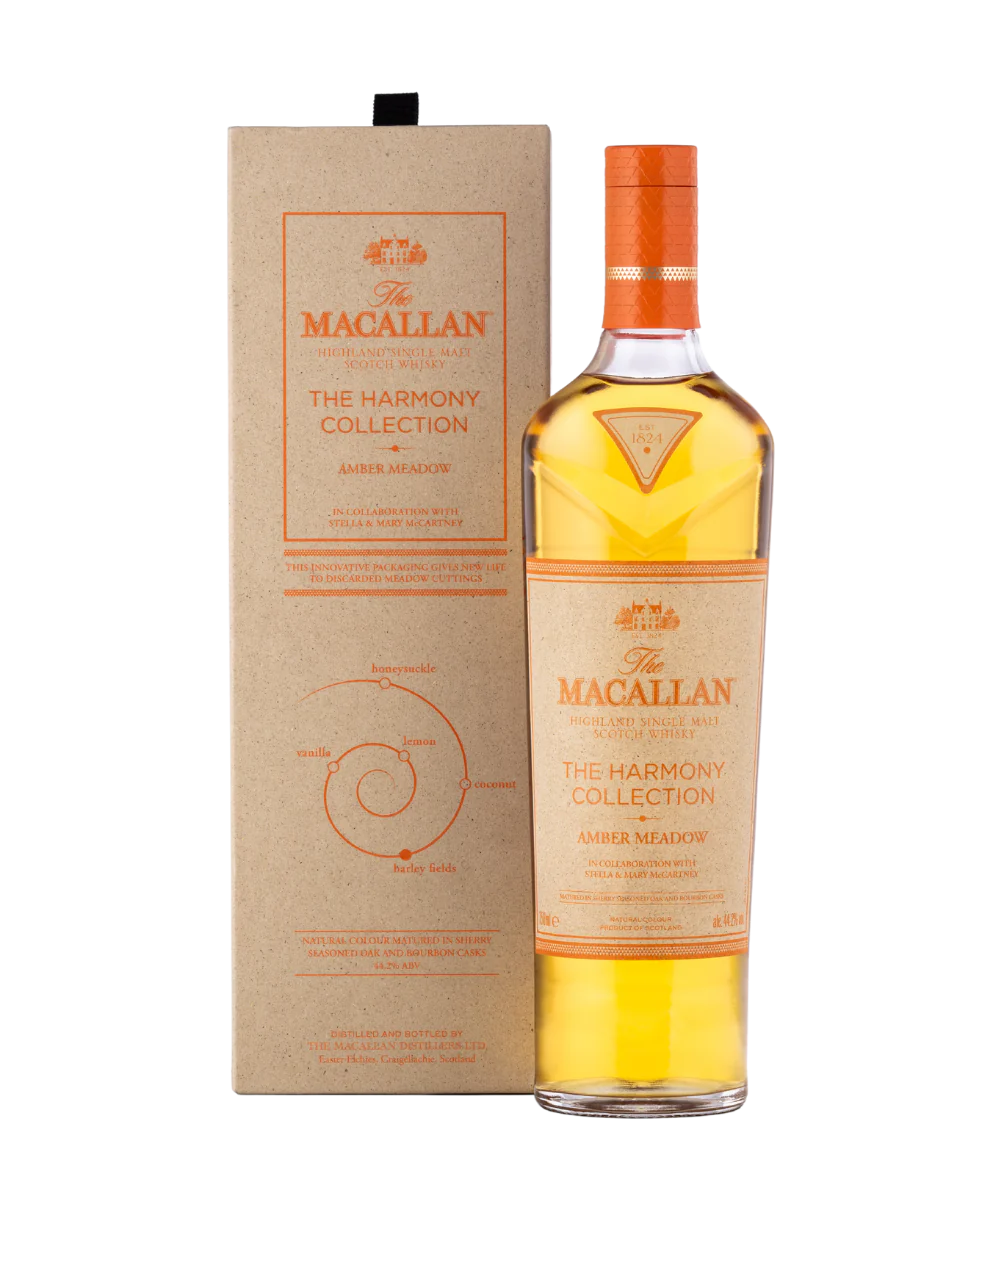 The Macallan The Harmony Collection Amber Meadow 23